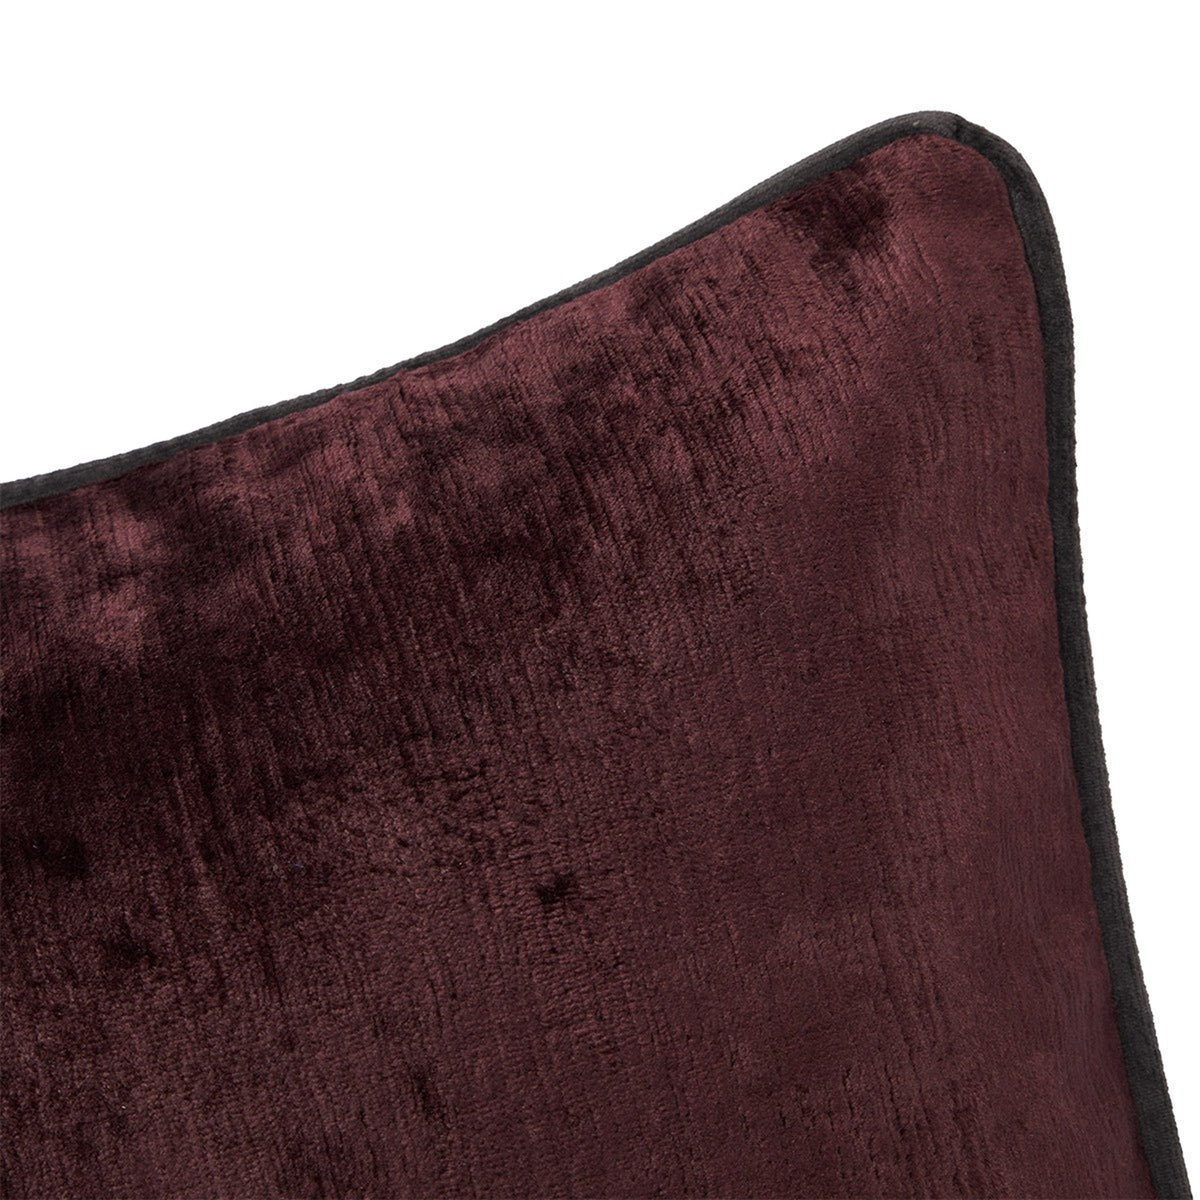 Close Up Image of Yves Delorme Iosis Boromee Decorative Pillow in Grenache Color